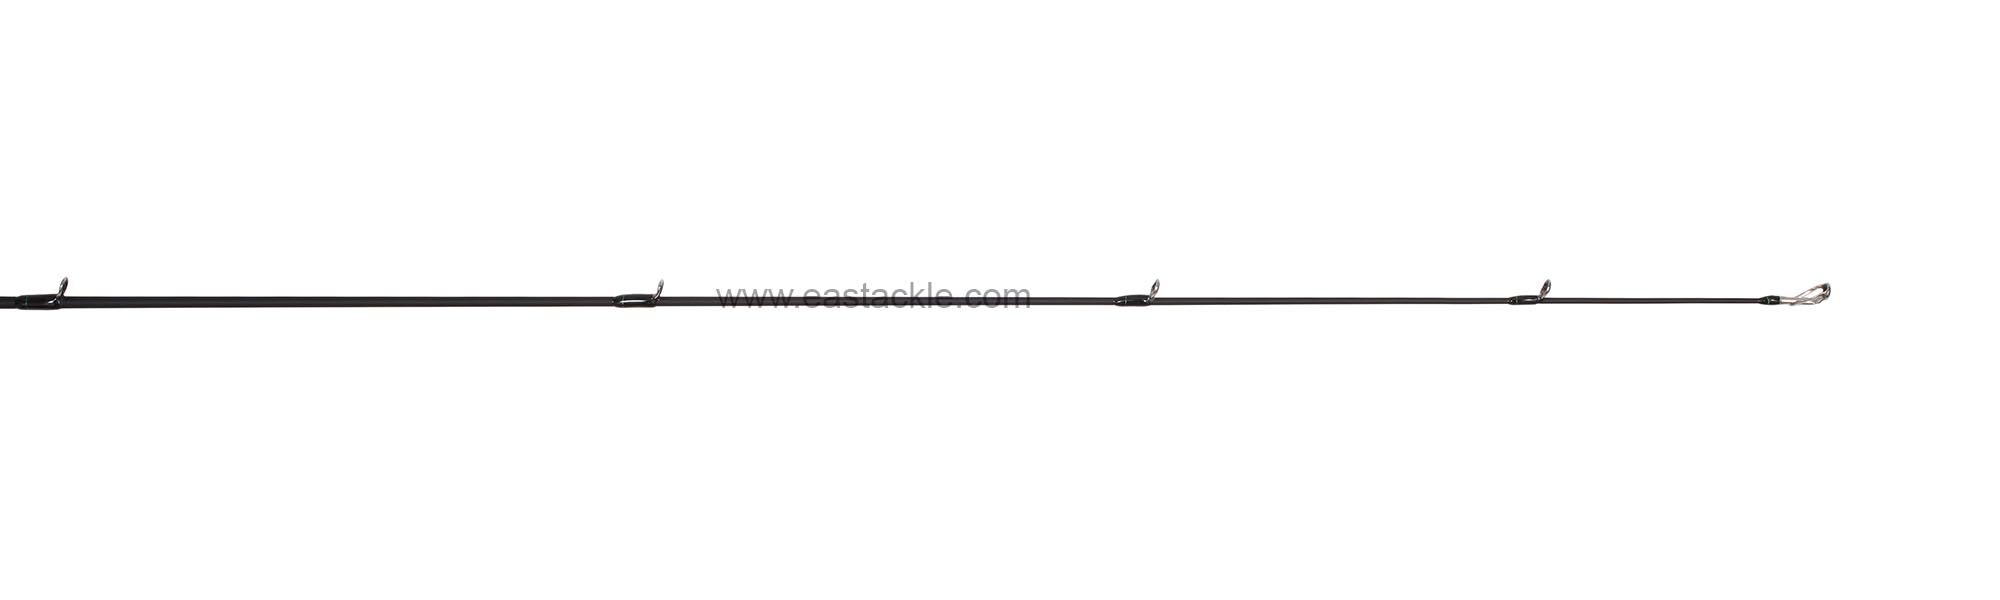 Rapala - Koivu - KVC652M - Bait Casting Rod - Tip Section (Side View) | Eastackle